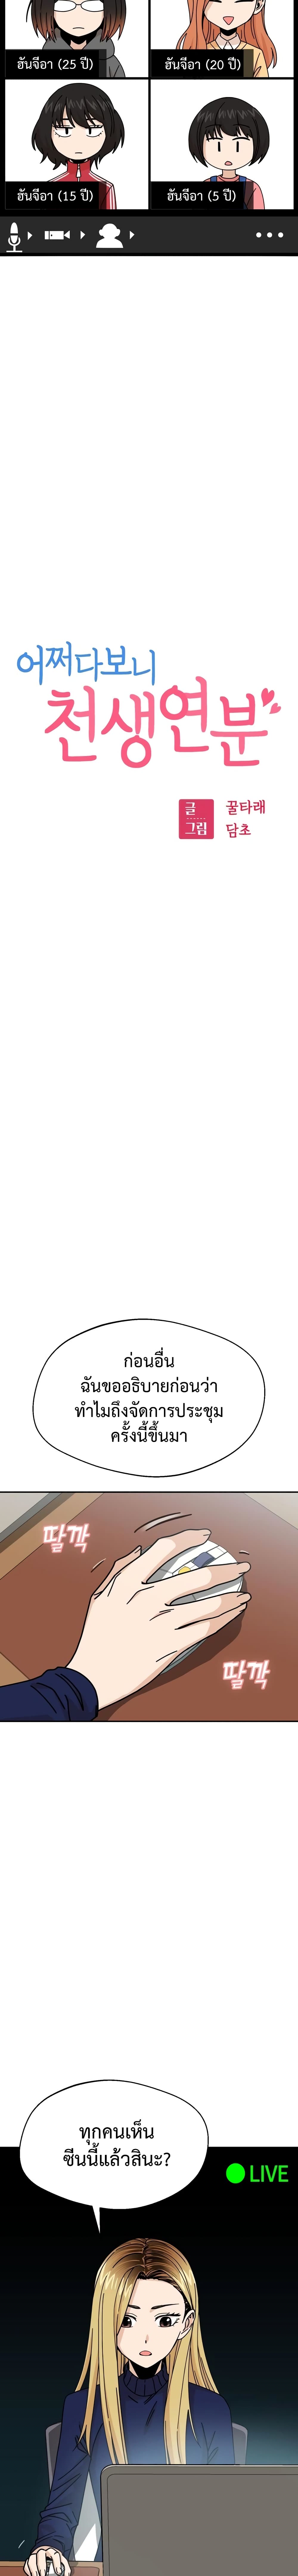 Match Made in Heaven by chance ตอนที่ 14 (4)